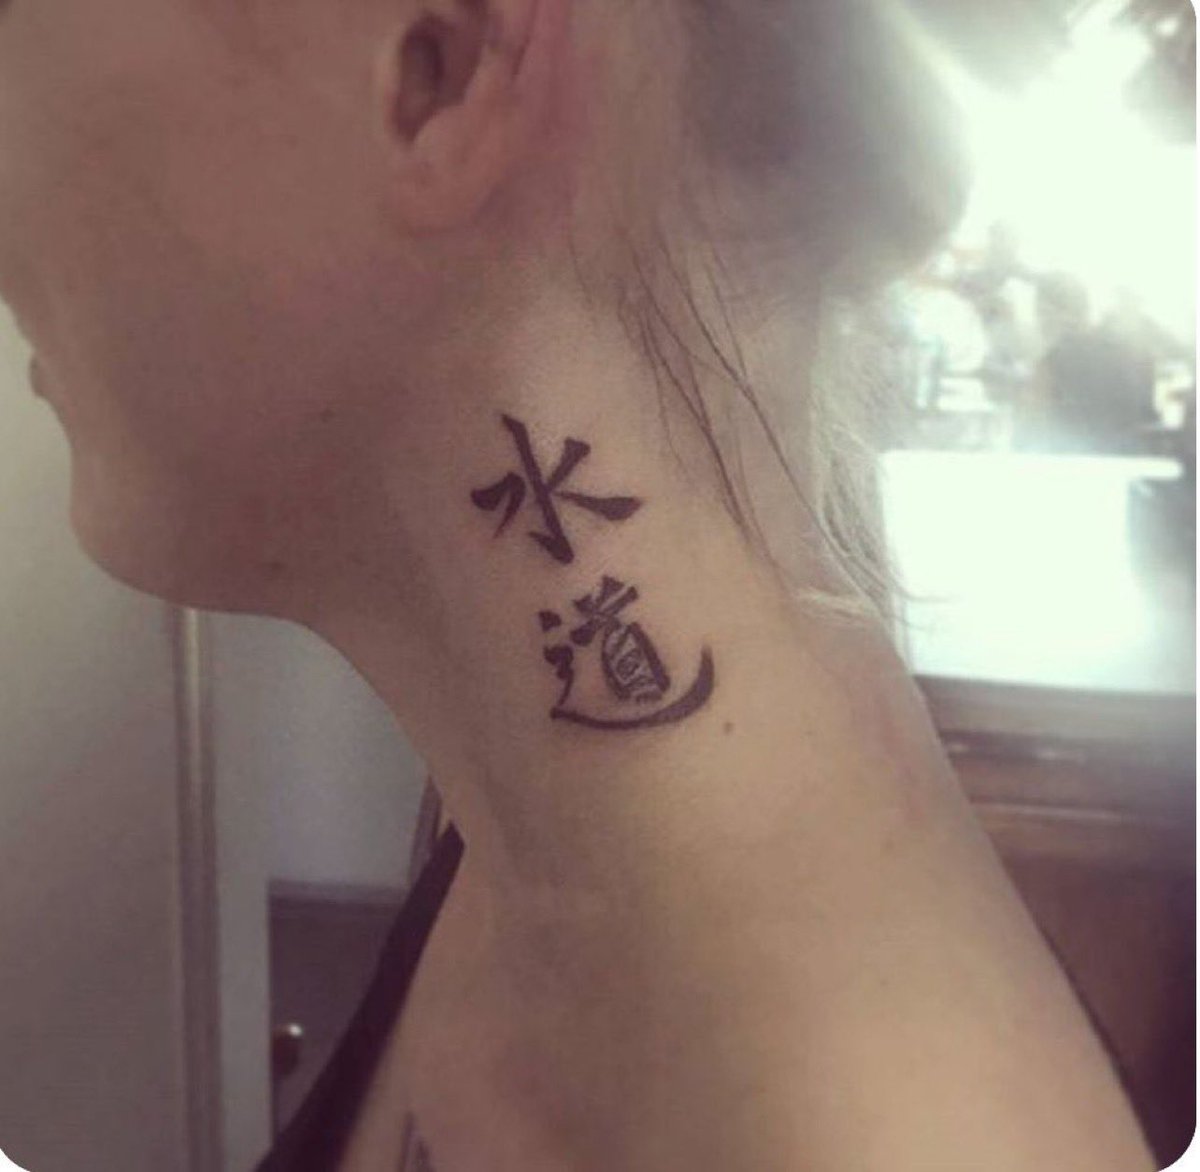 If you are thinking of getting a Japanese or kanji tattoo, I'd appreciate if you could consult me first. There are too many cases of foreigners getting kanji tattoos that Japanese people would laugh at.

She probably intended to get a tattoo meaning 'the path of water', but the…